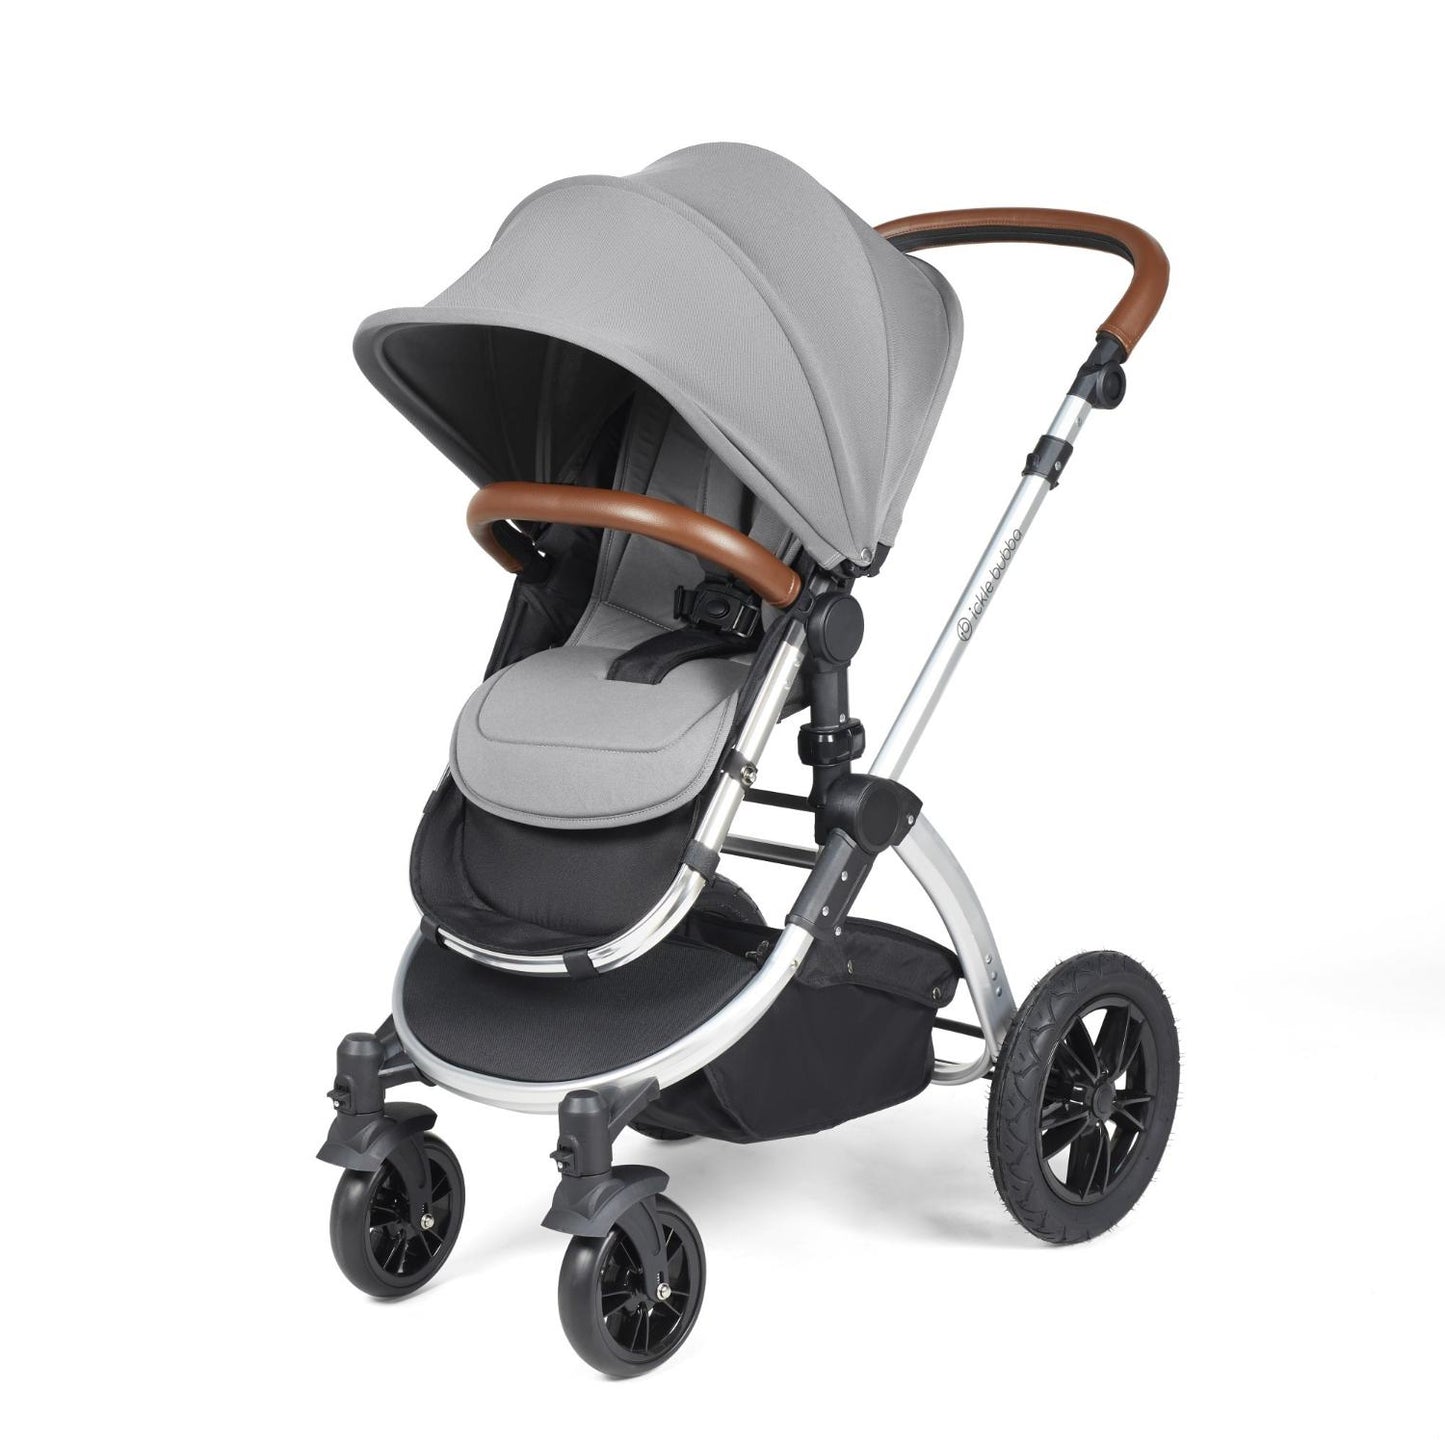 Ickle Bubba Stomp Luxe Pushchair with seat unit attached in Pearl Grey colour with silver chassis and tan handle